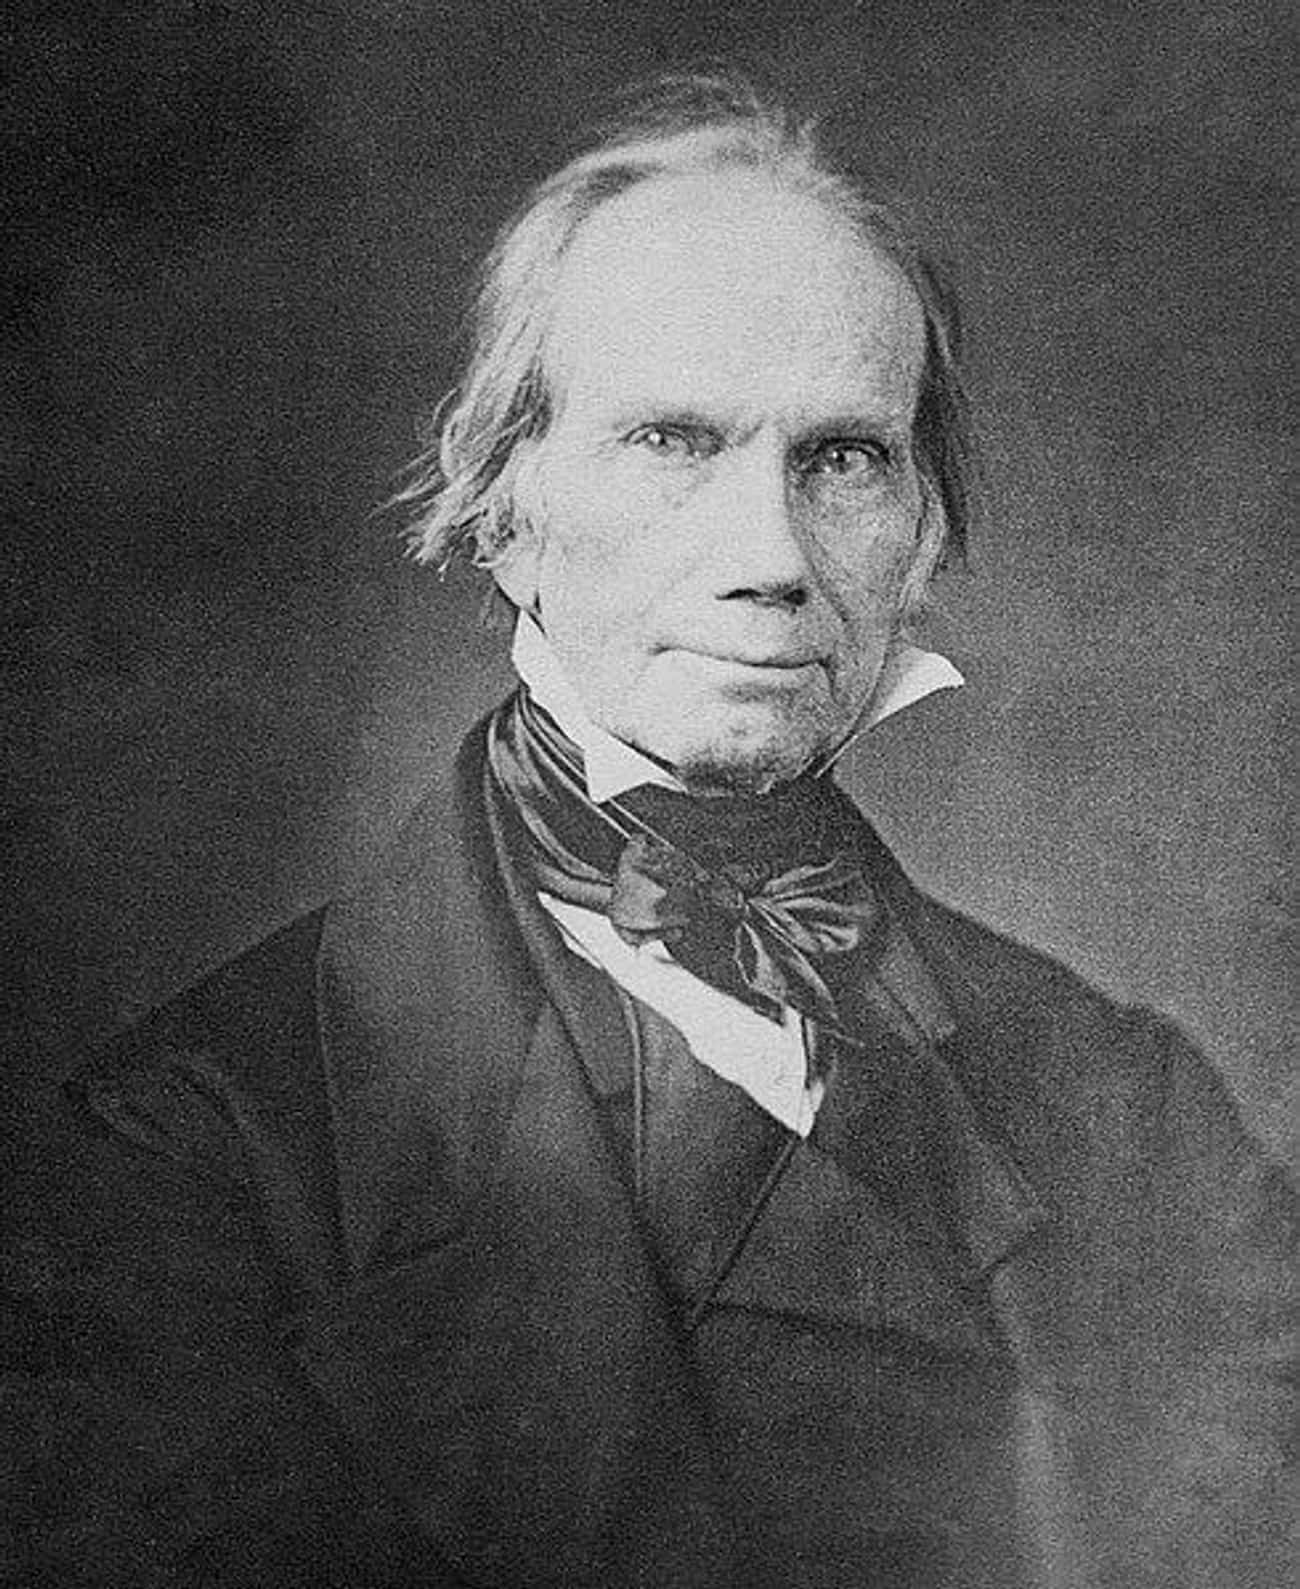 Henry Clay Failed Multiple Bids For The Presidency But Still Secured A Lasting Political Legacy